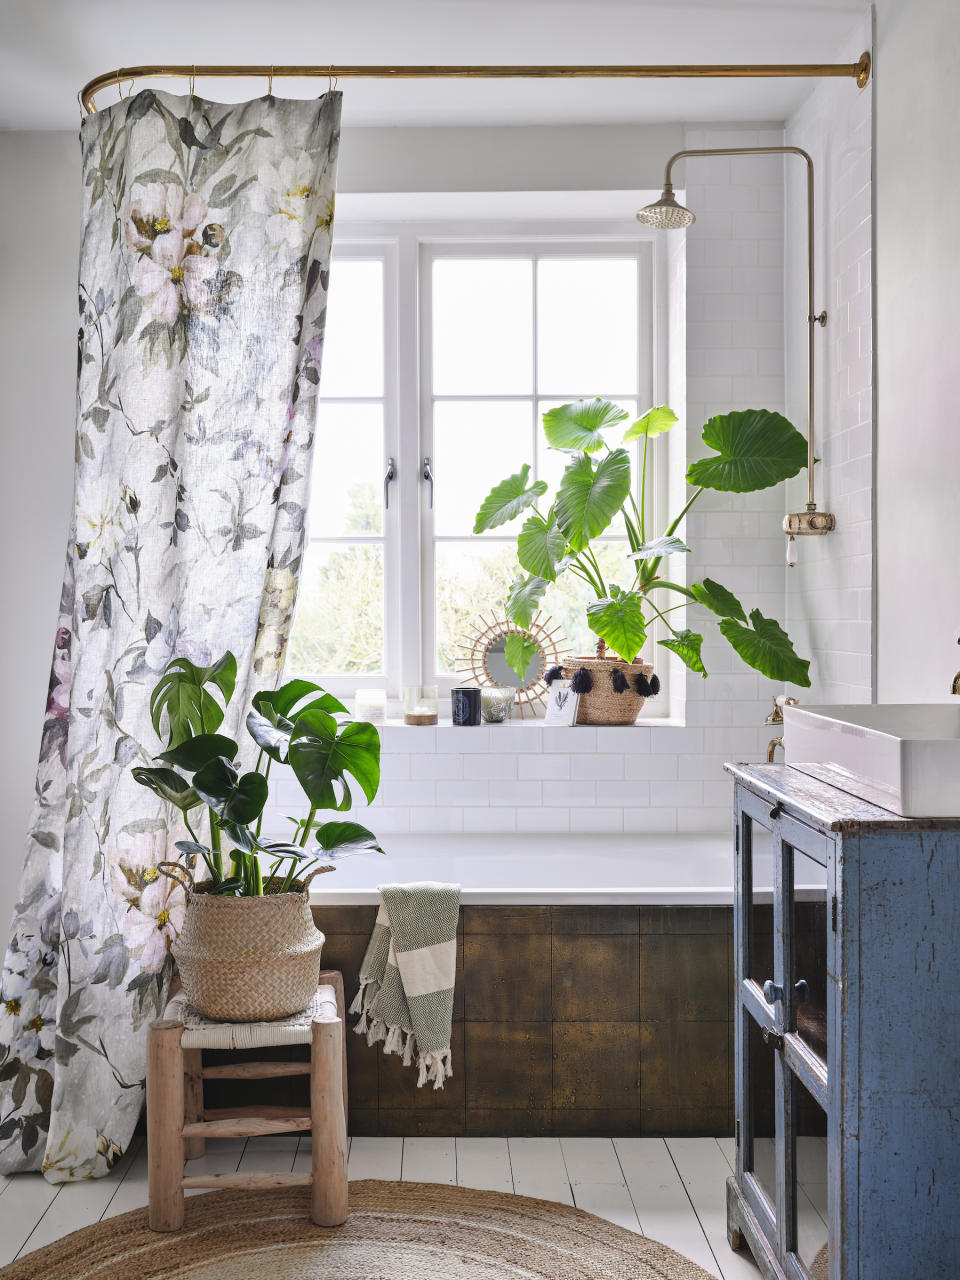 <p> Foliage and floral motifs are a key motif in country-style fabrics and wallpapers. But bringing living nature into your home in the form of plants and flowers will give an extra dimension to your decor. </p> <p> Use the sculptural forms of house plants to add drama, color and movement to schemes. Choose your greenery to suit the room – moisture-loving for a bathroom, for example, or shade tolerant in a room that doesn't get much sun. </p> <p> Forage for foliage and blossom-heavy branches, or buy locally grown flowers, to create seasonal displays. It's a wonderful to way to showcase the beauty of nature in your home. </p>